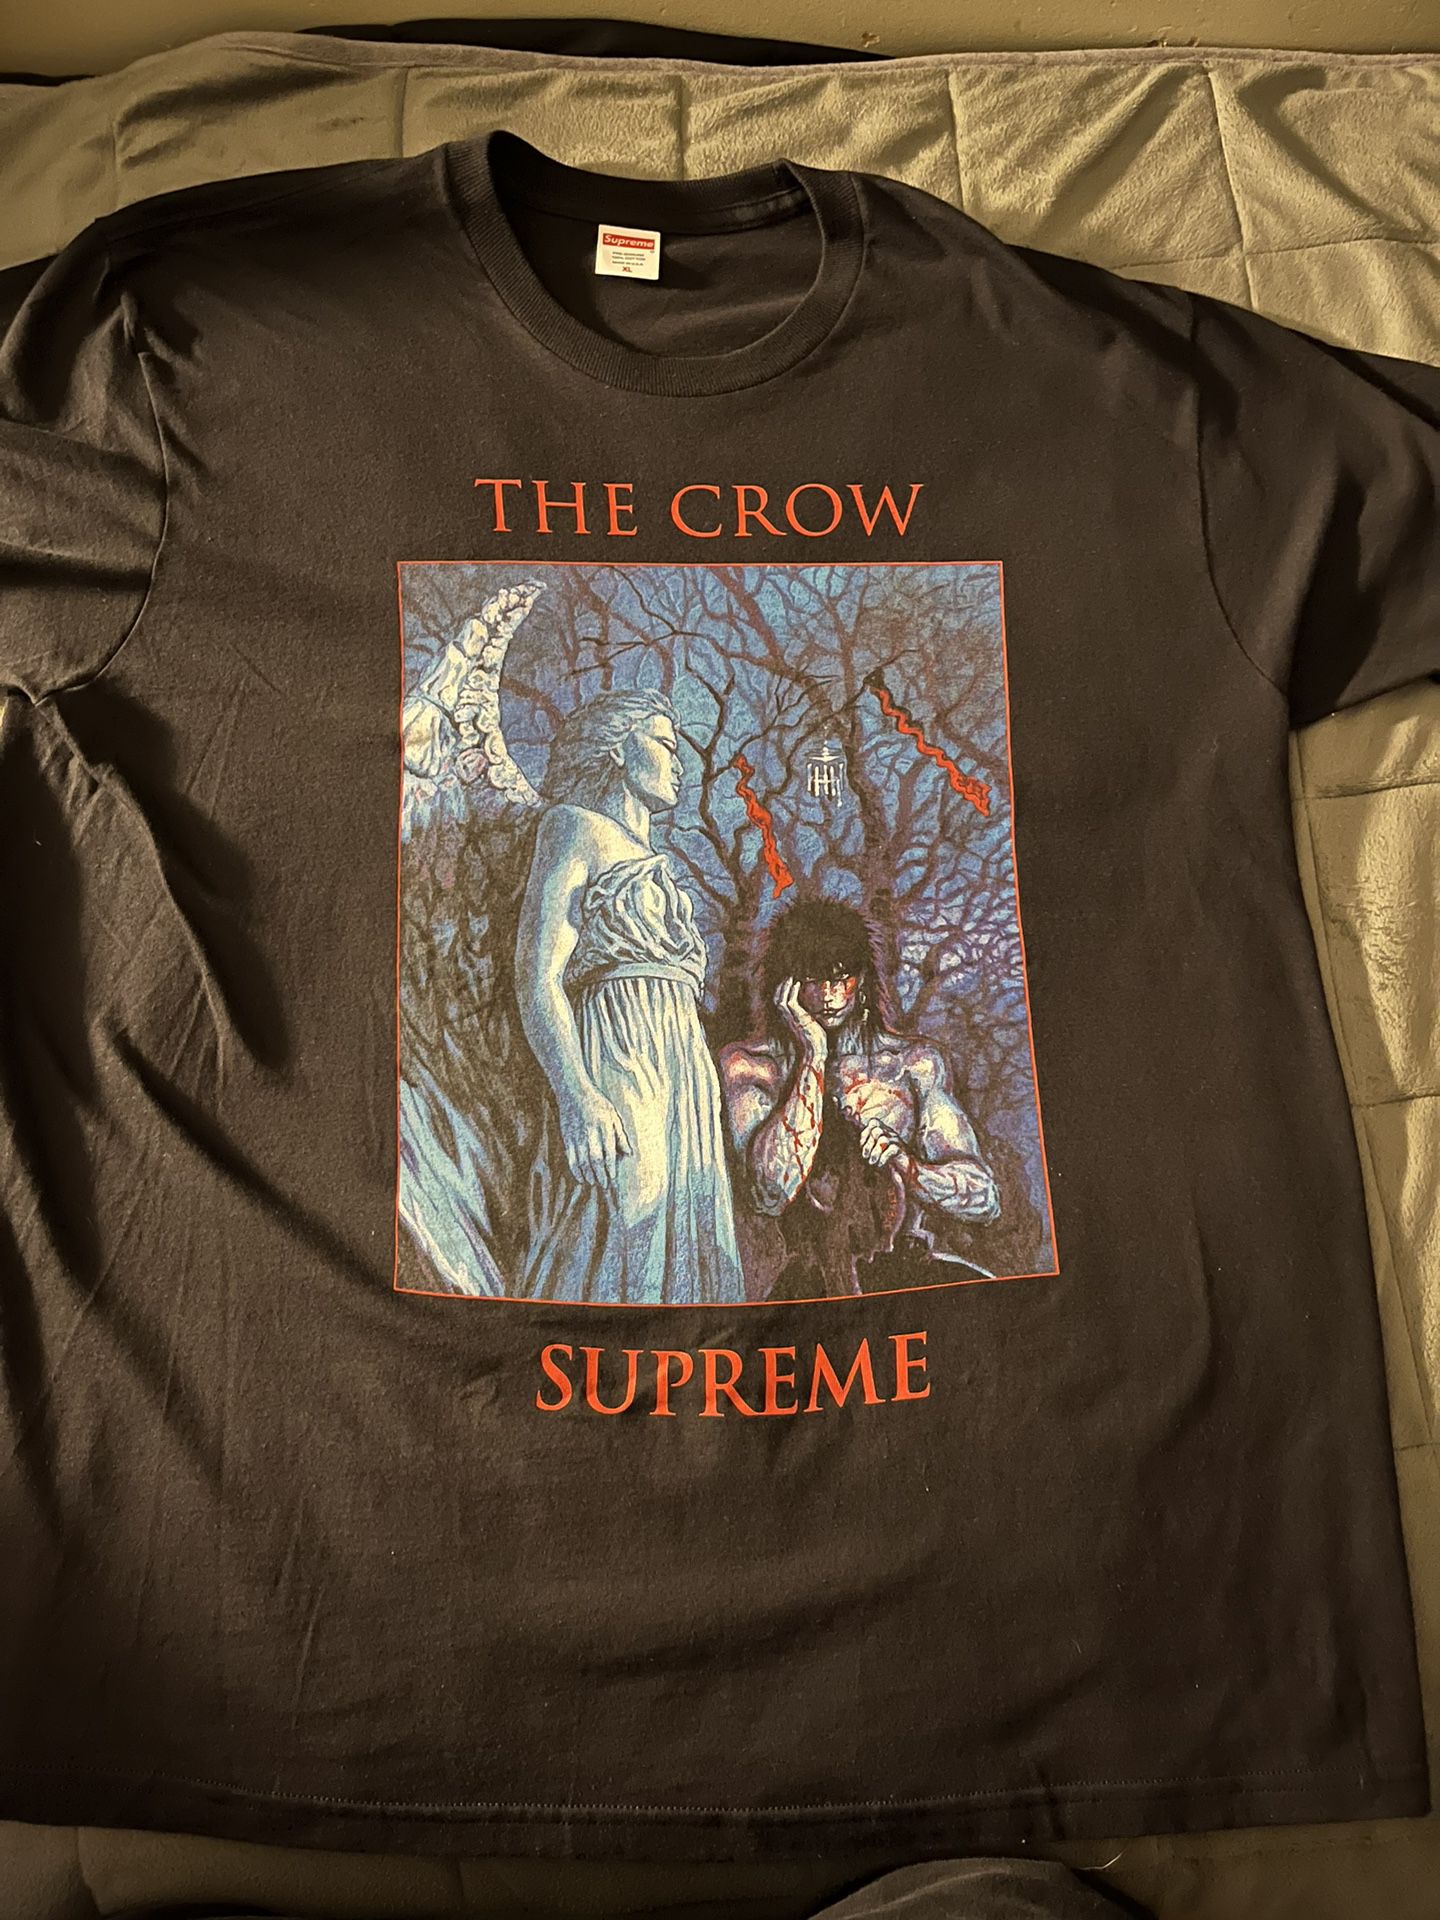 SUPREME “The Crow” - Size XL Brand New!